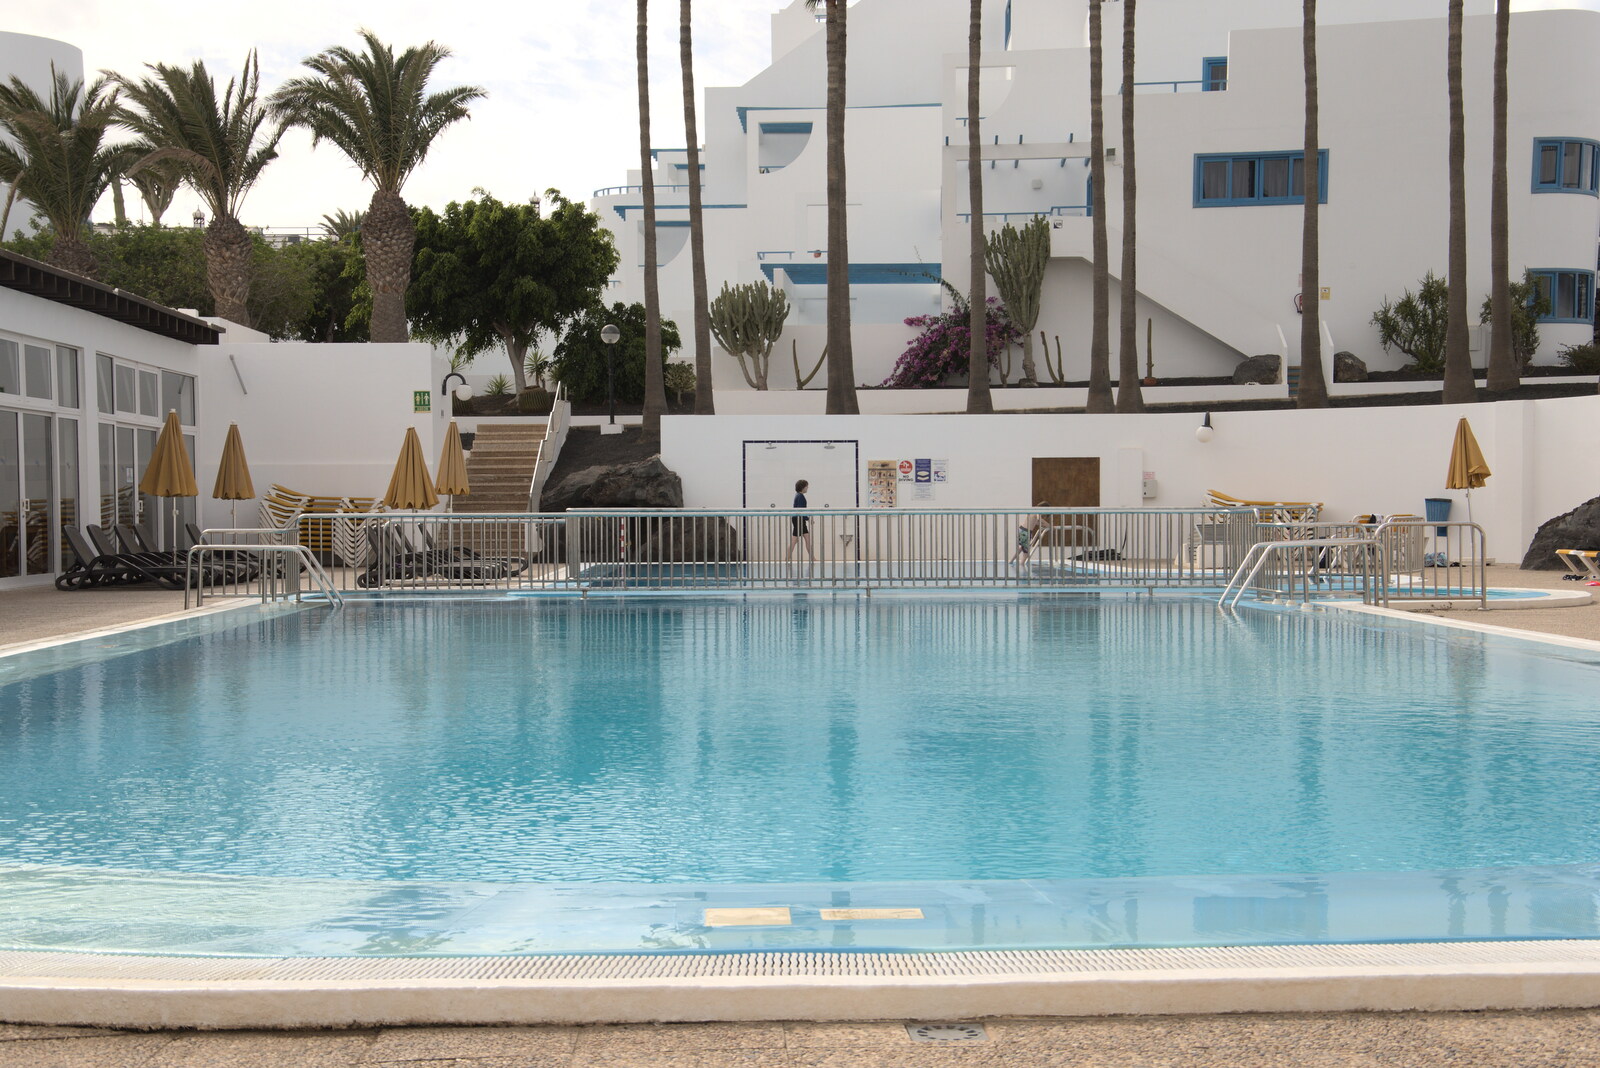 Fred roams around by the pool from Five Days in Lanzarote, Canary Islands, Spain - 24th October 2021